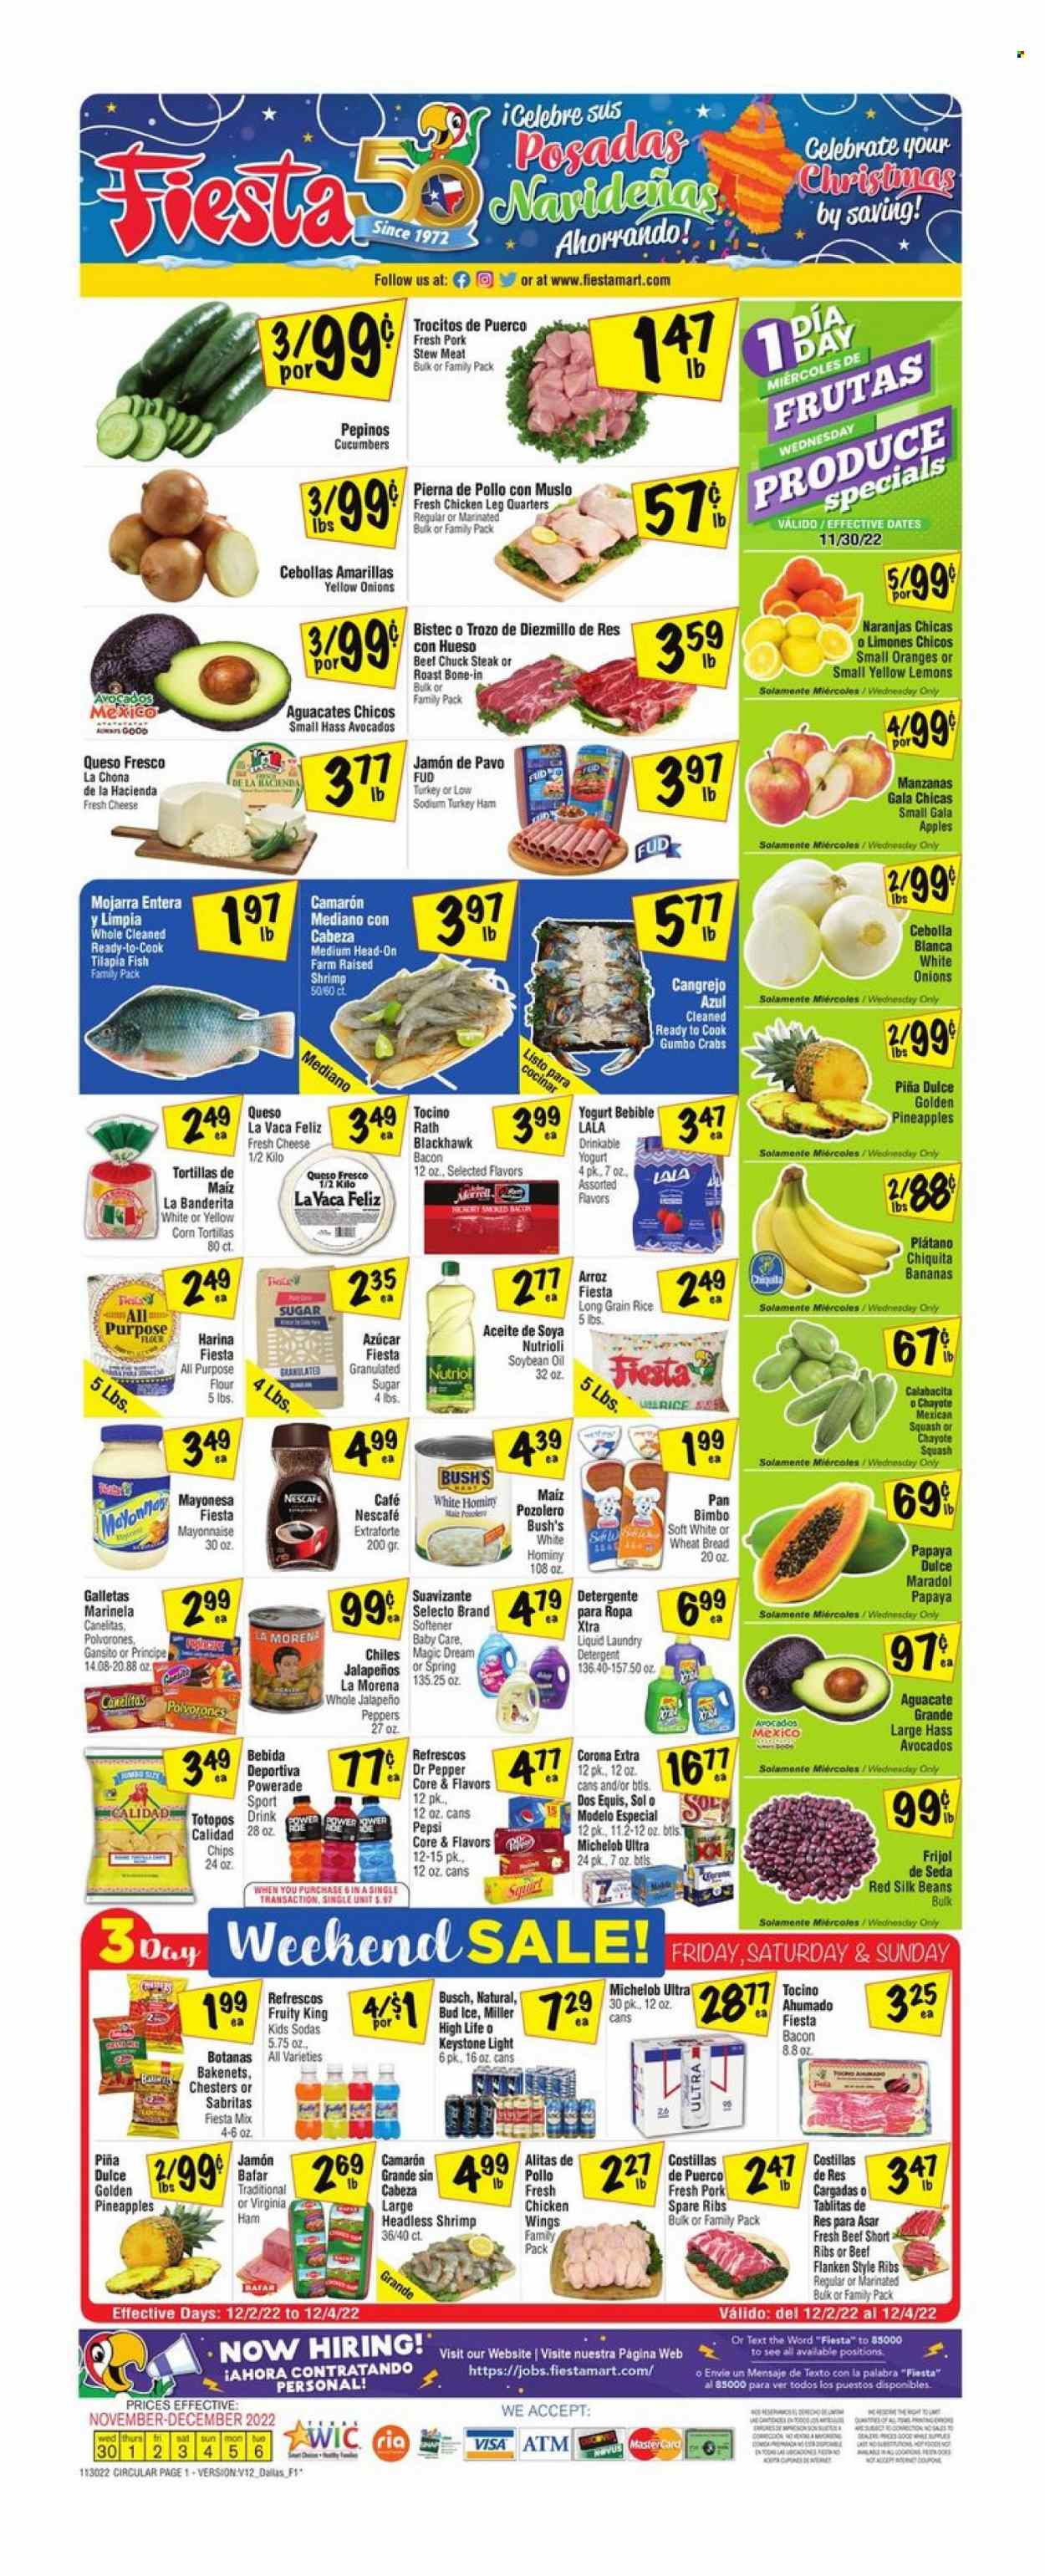 thumbnail - Fiesta Mart Flyer - 11/30/2022 - 12/06/2022 - Sales products - stew meat, corn tortillas, tortillas, wheat bread, beans, cucumber, peppers, jalapeño, mexican squash, chayote squash, apples, avocado, bananas, Gala, pineapple, papaya, oranges, chayote, tilapia, crab, fish, shrimps, bacon, ham, virginia ham, queso fresco, cheese, yoghurt, Silk, mayonnaise, chicken wings, chips, sugar, rice, long grain rice, soya oil, oil, Powerade, Pepsi, Dr. Pepper, Nescafé, beer, Busch, Corona Extra, Miller, Sol, Keystone, Modelo, chicken legs, beef meat, steak, chuck steak, pork meat, pork ribs, pork spare ribs, detergent, fabric softener, laundry detergent, XTRA, Dos Equis, Michelob, lemons. Page 1.